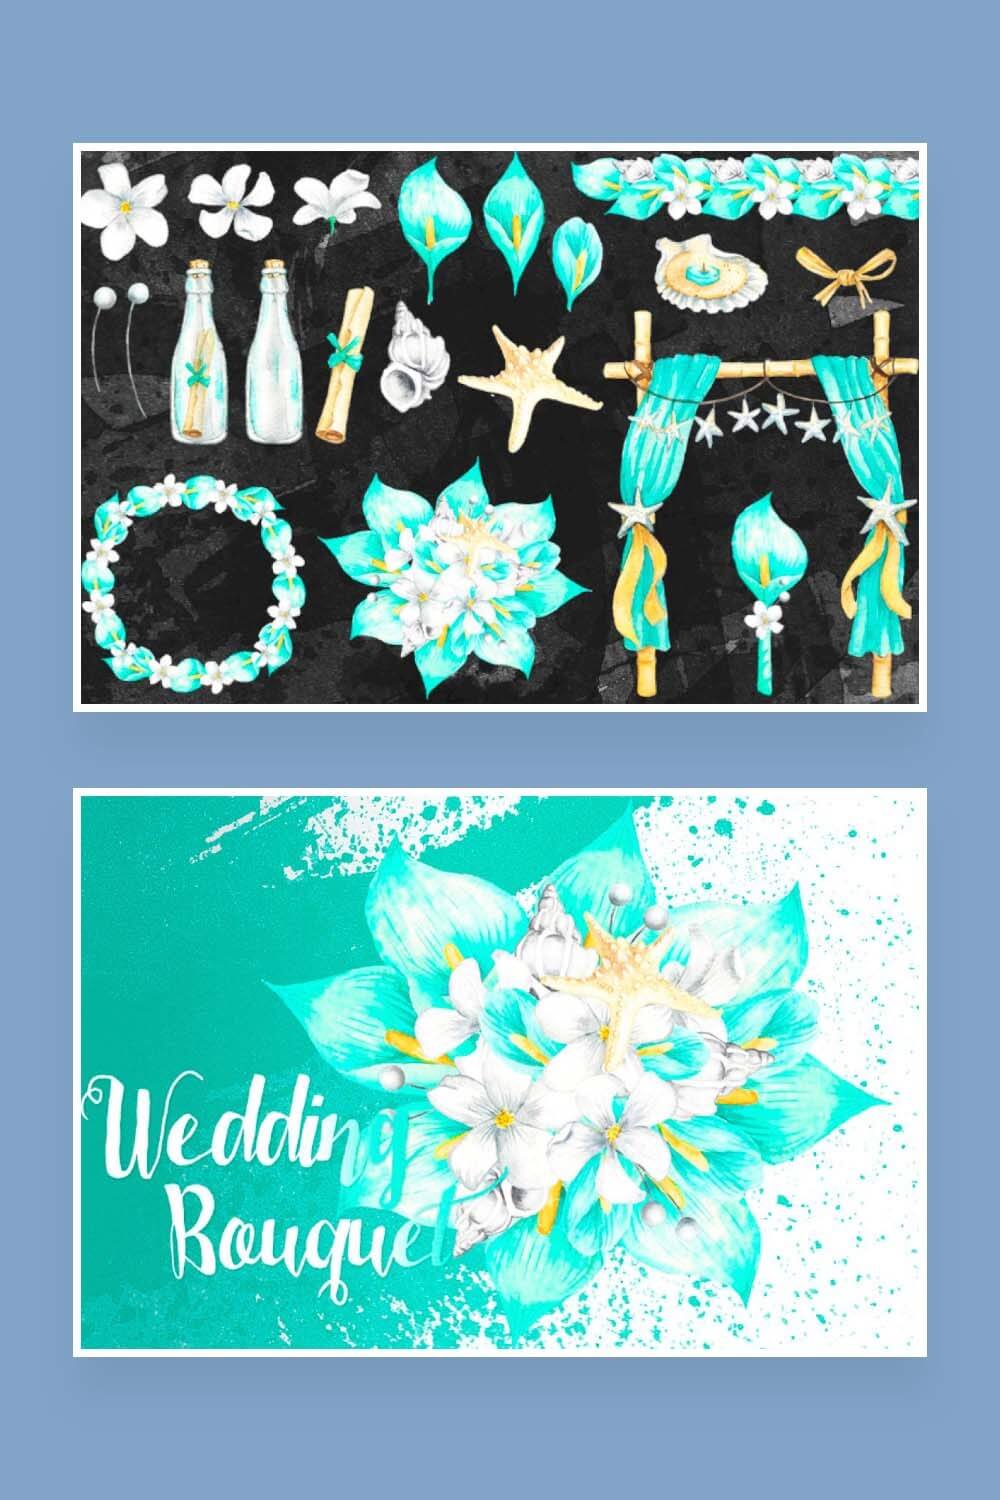 Blue wedding flowers clipart on a black background and a picture with a wedding bouquet.